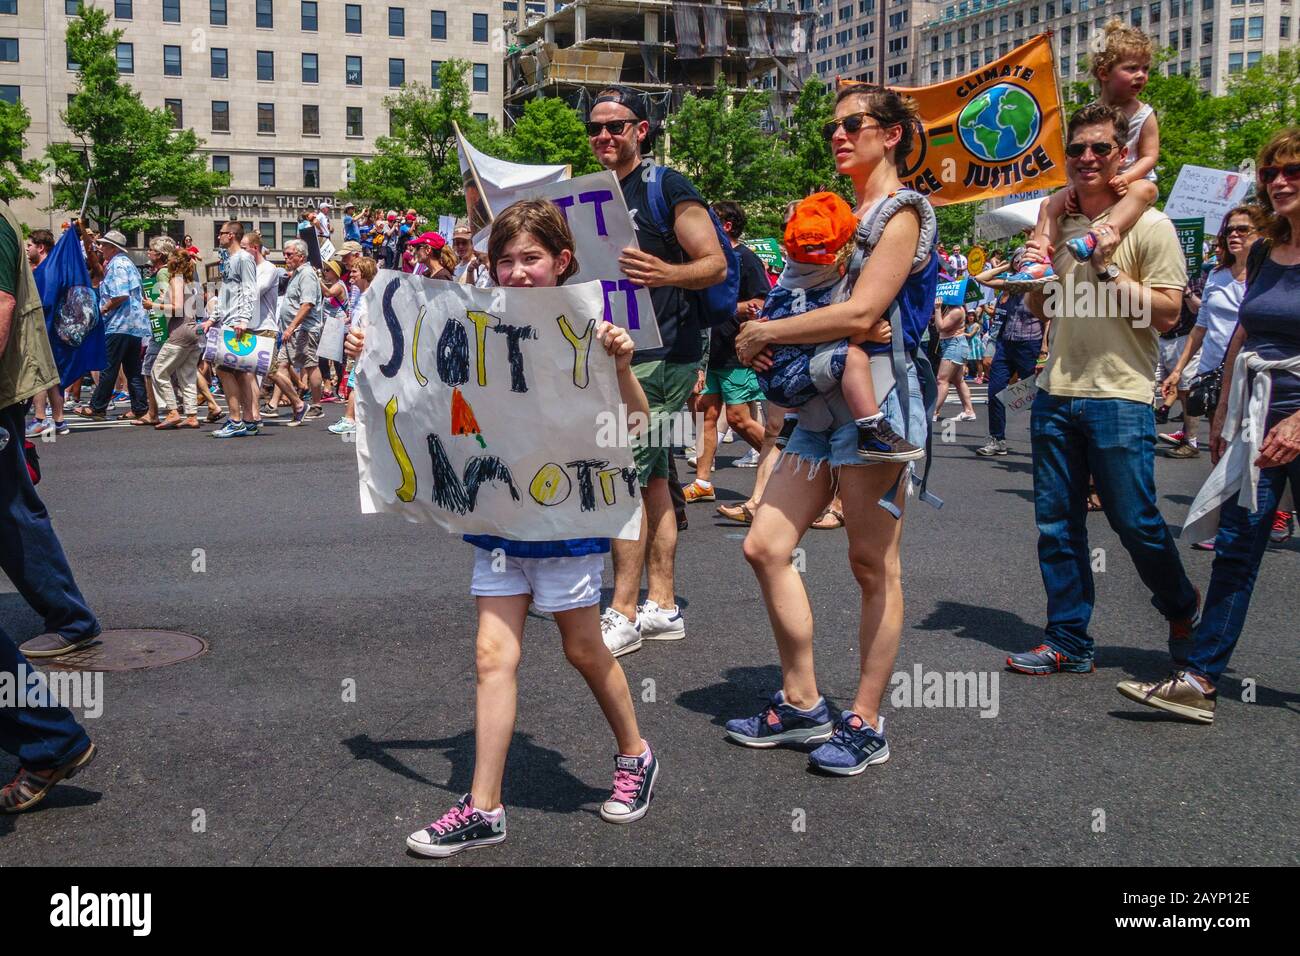 Washington DC, USA:April 29, 2017-Protesters march at the Climate Change Demonstration on Pennsylvania Avenue. Stock Photo